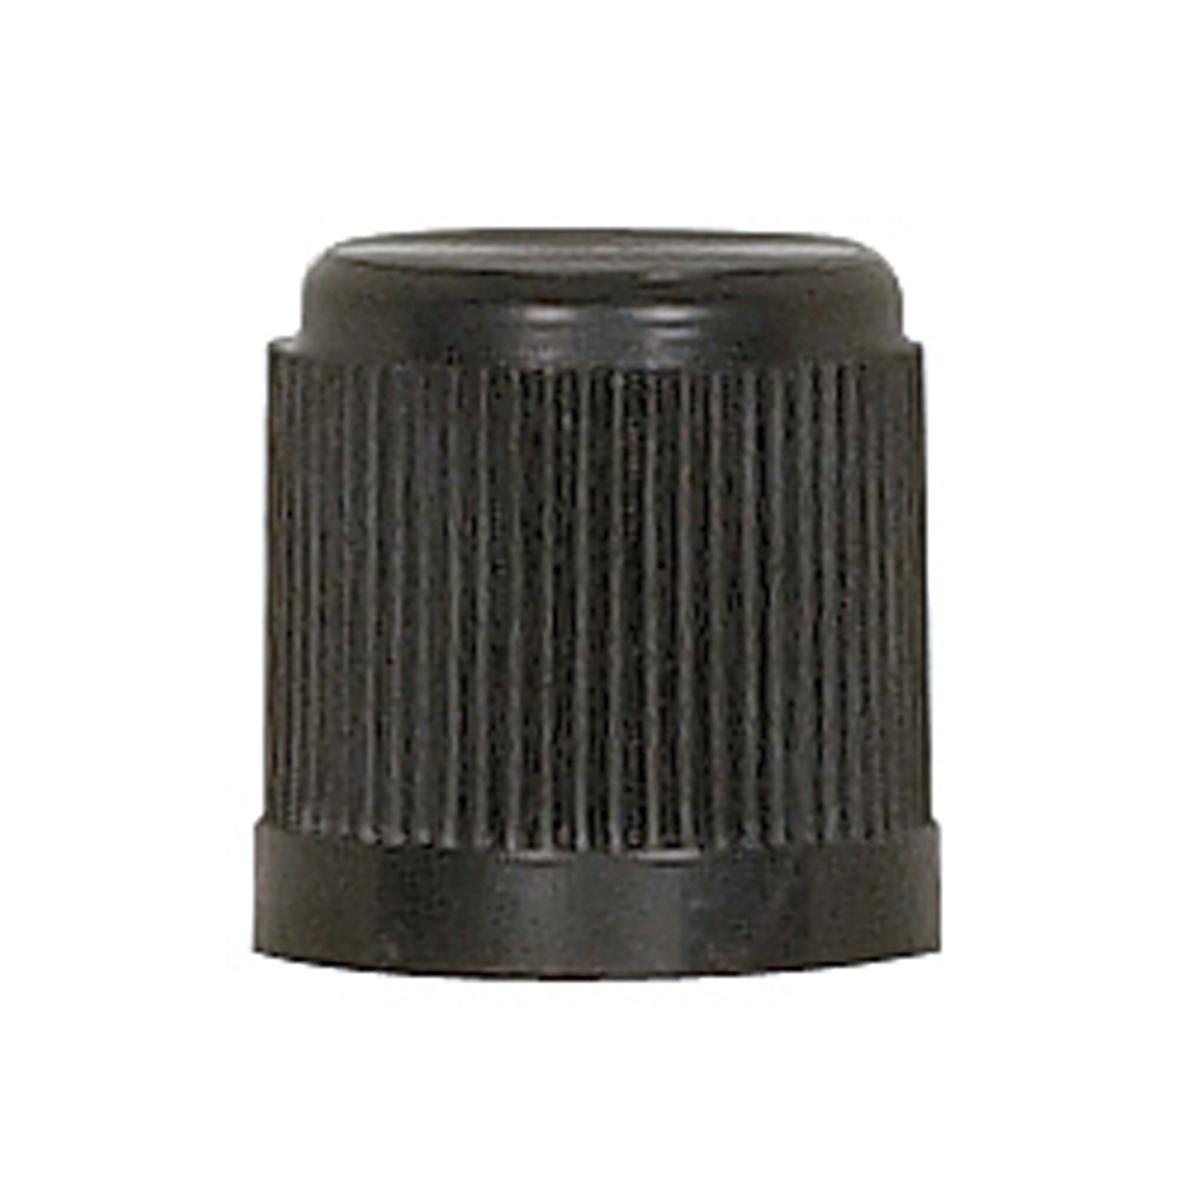 90-2315 BLACK KNOB FOR LAMP DIMMERS